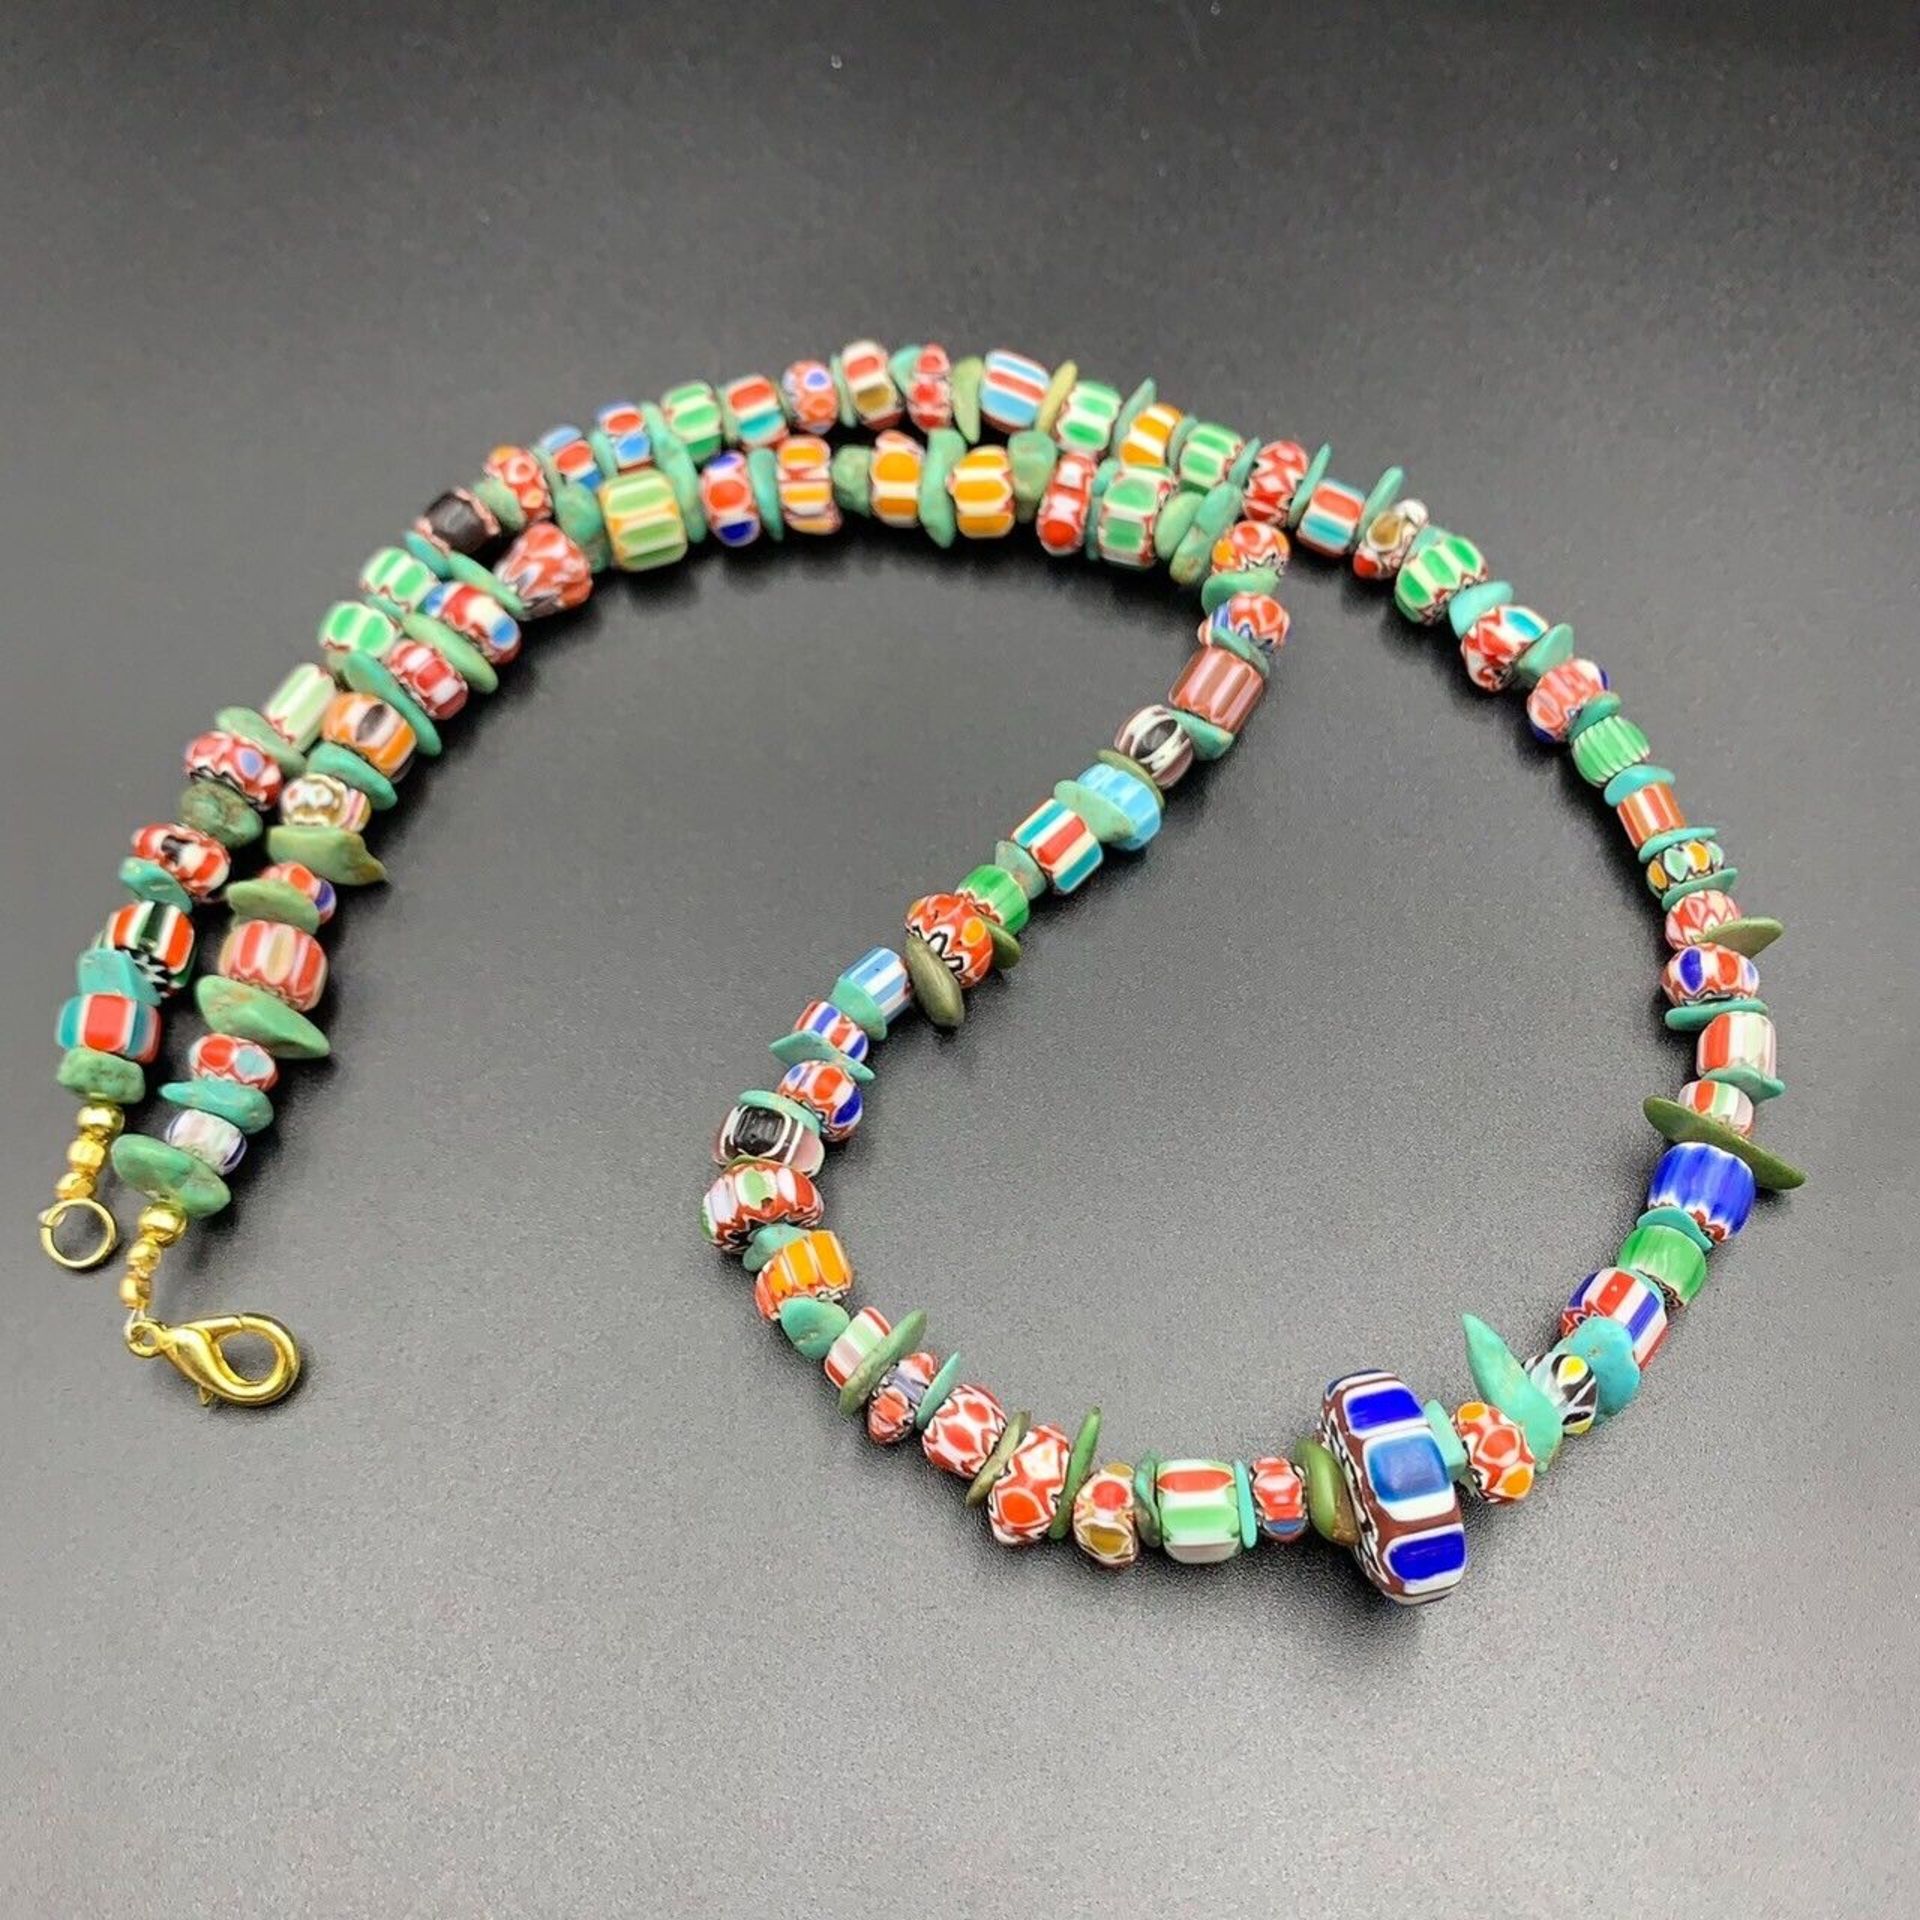 Nice Chevron Trade Glass Beads With Antique Turquoise ChipStone Beads Necklace - Image 4 of 7